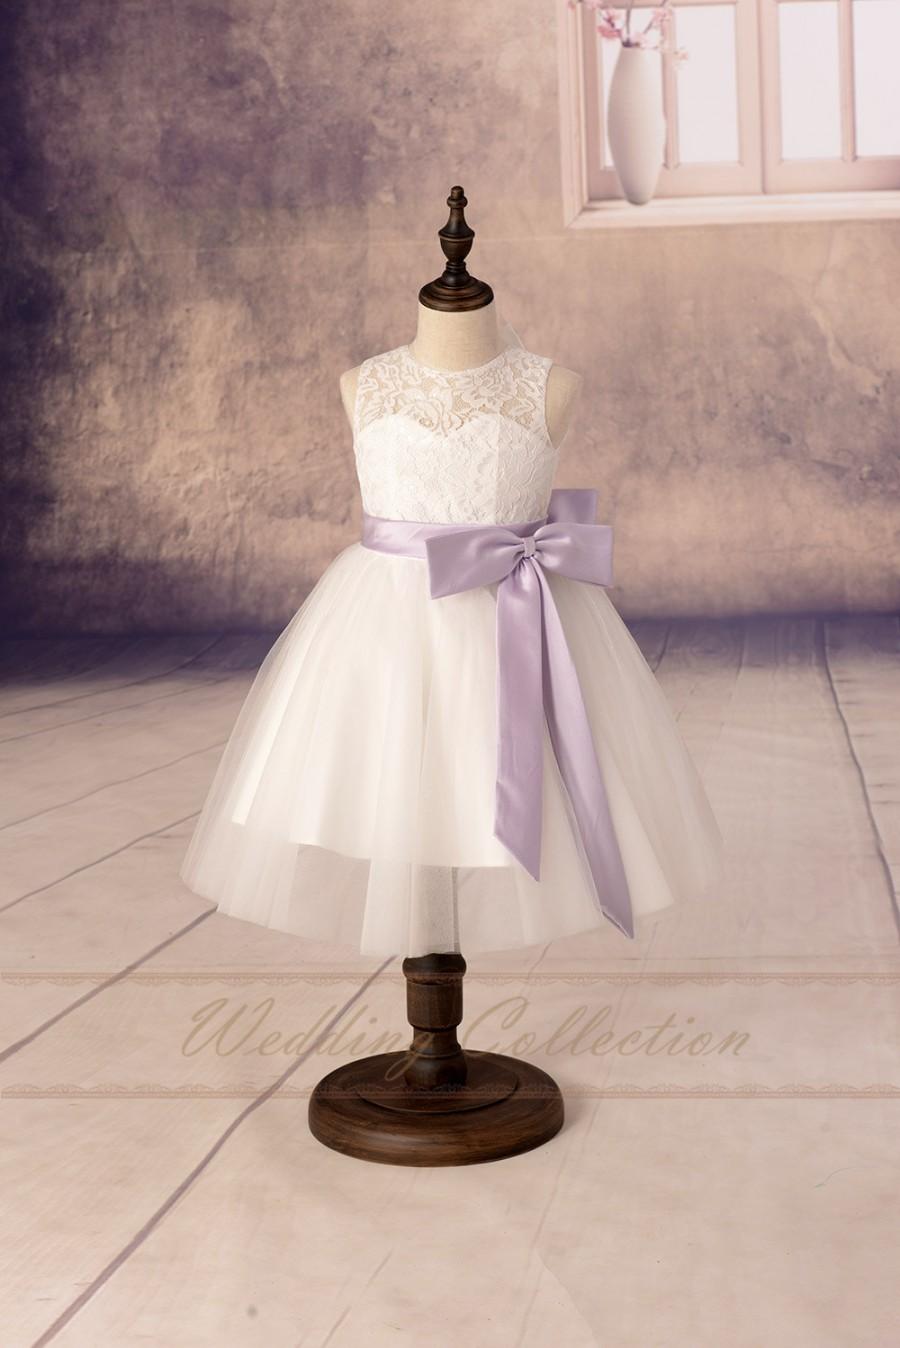 Mariage - Lace Flower Girl Dresses, Tulle Flower Girls Dress With Purple Sash and Bow (sandovalceja23)